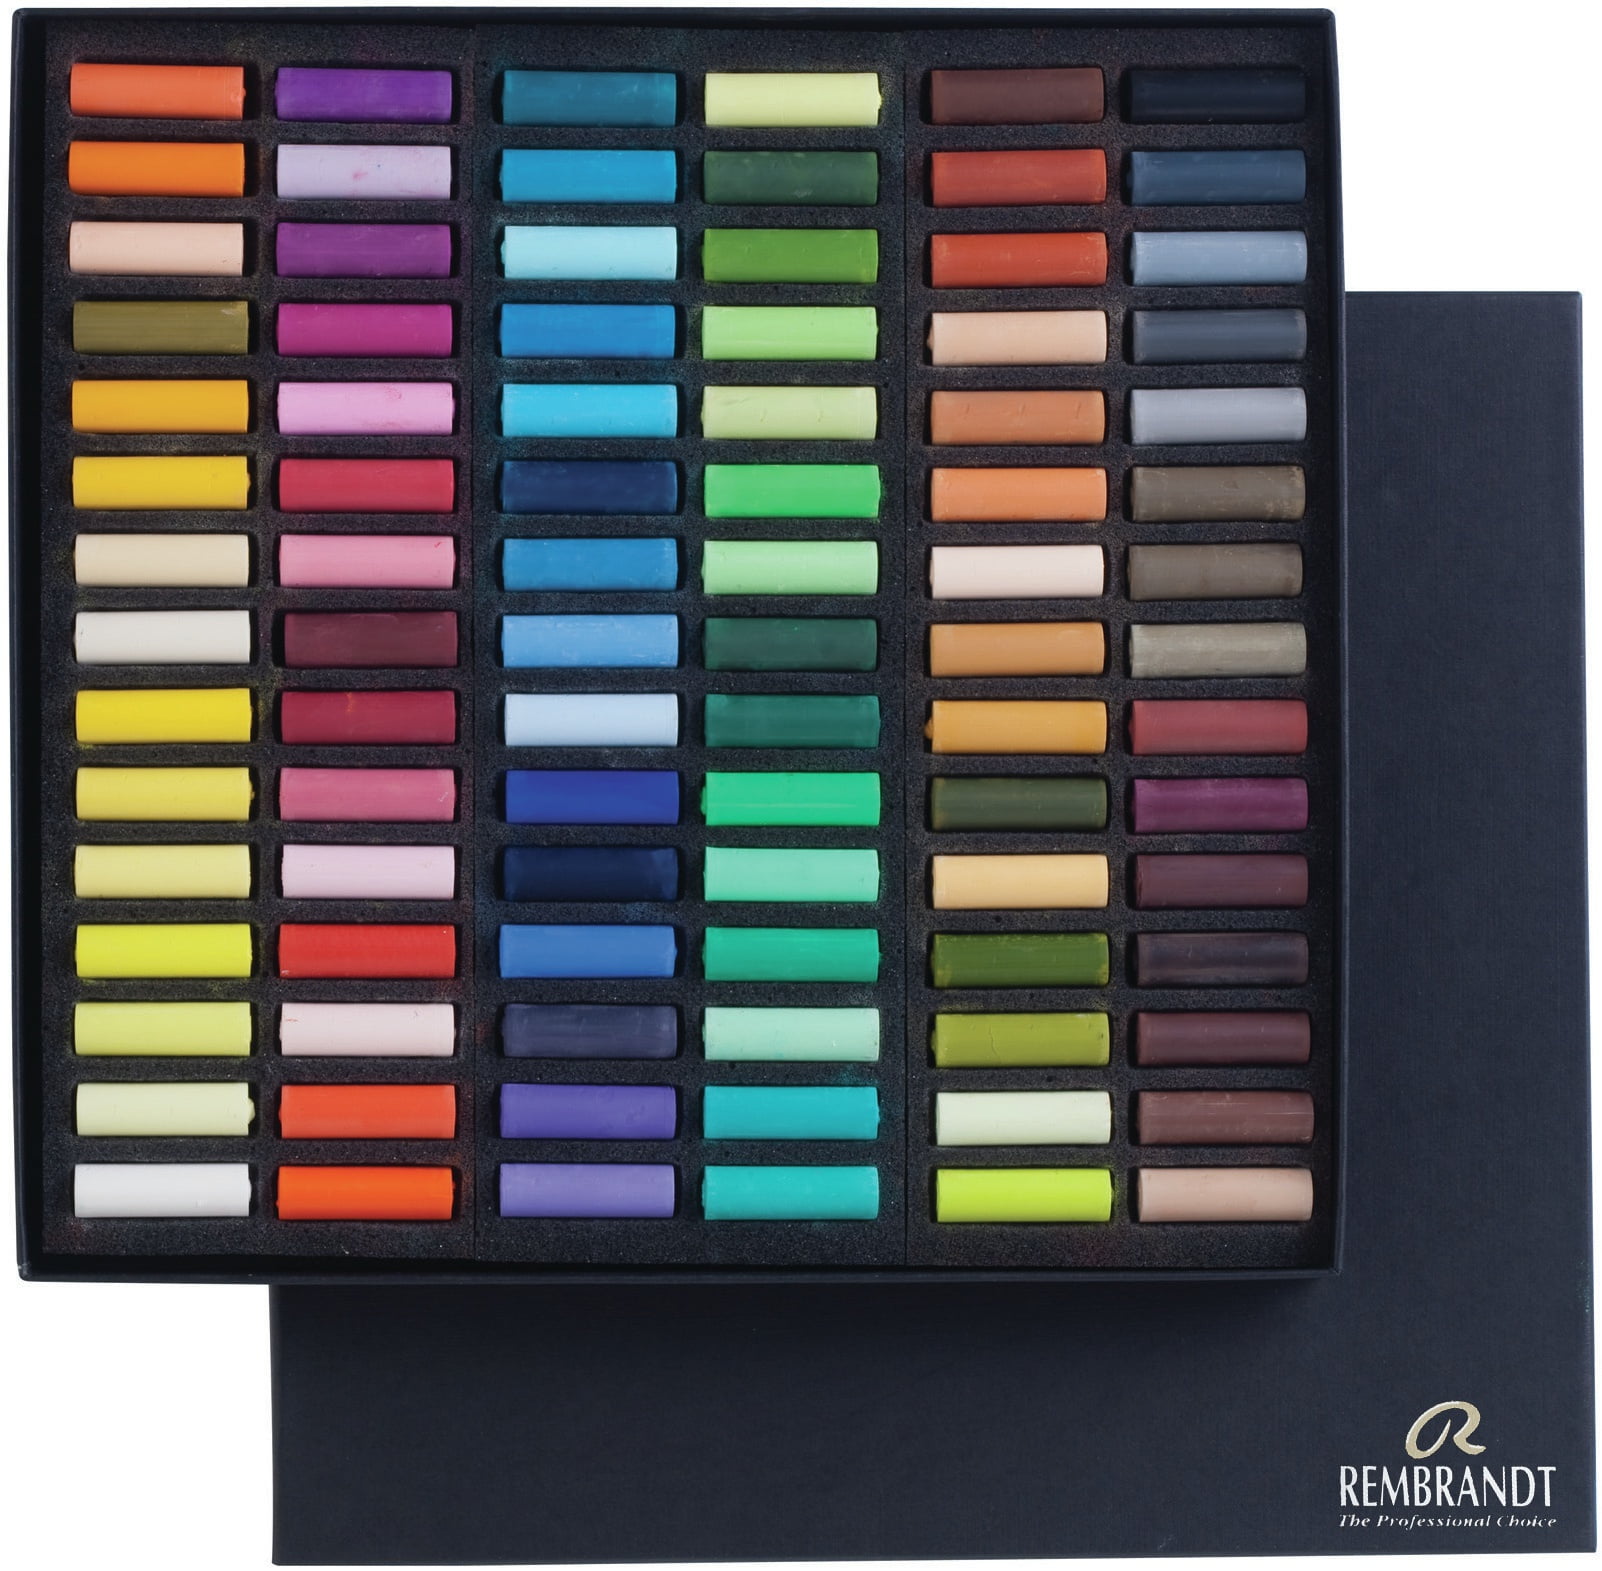 Rembrandt Soft Pastel Master Box Set, 5 15 30 60 Round Sticks Have  Excellent Softness for Beautiful Color Release and Toning. - AliExpress